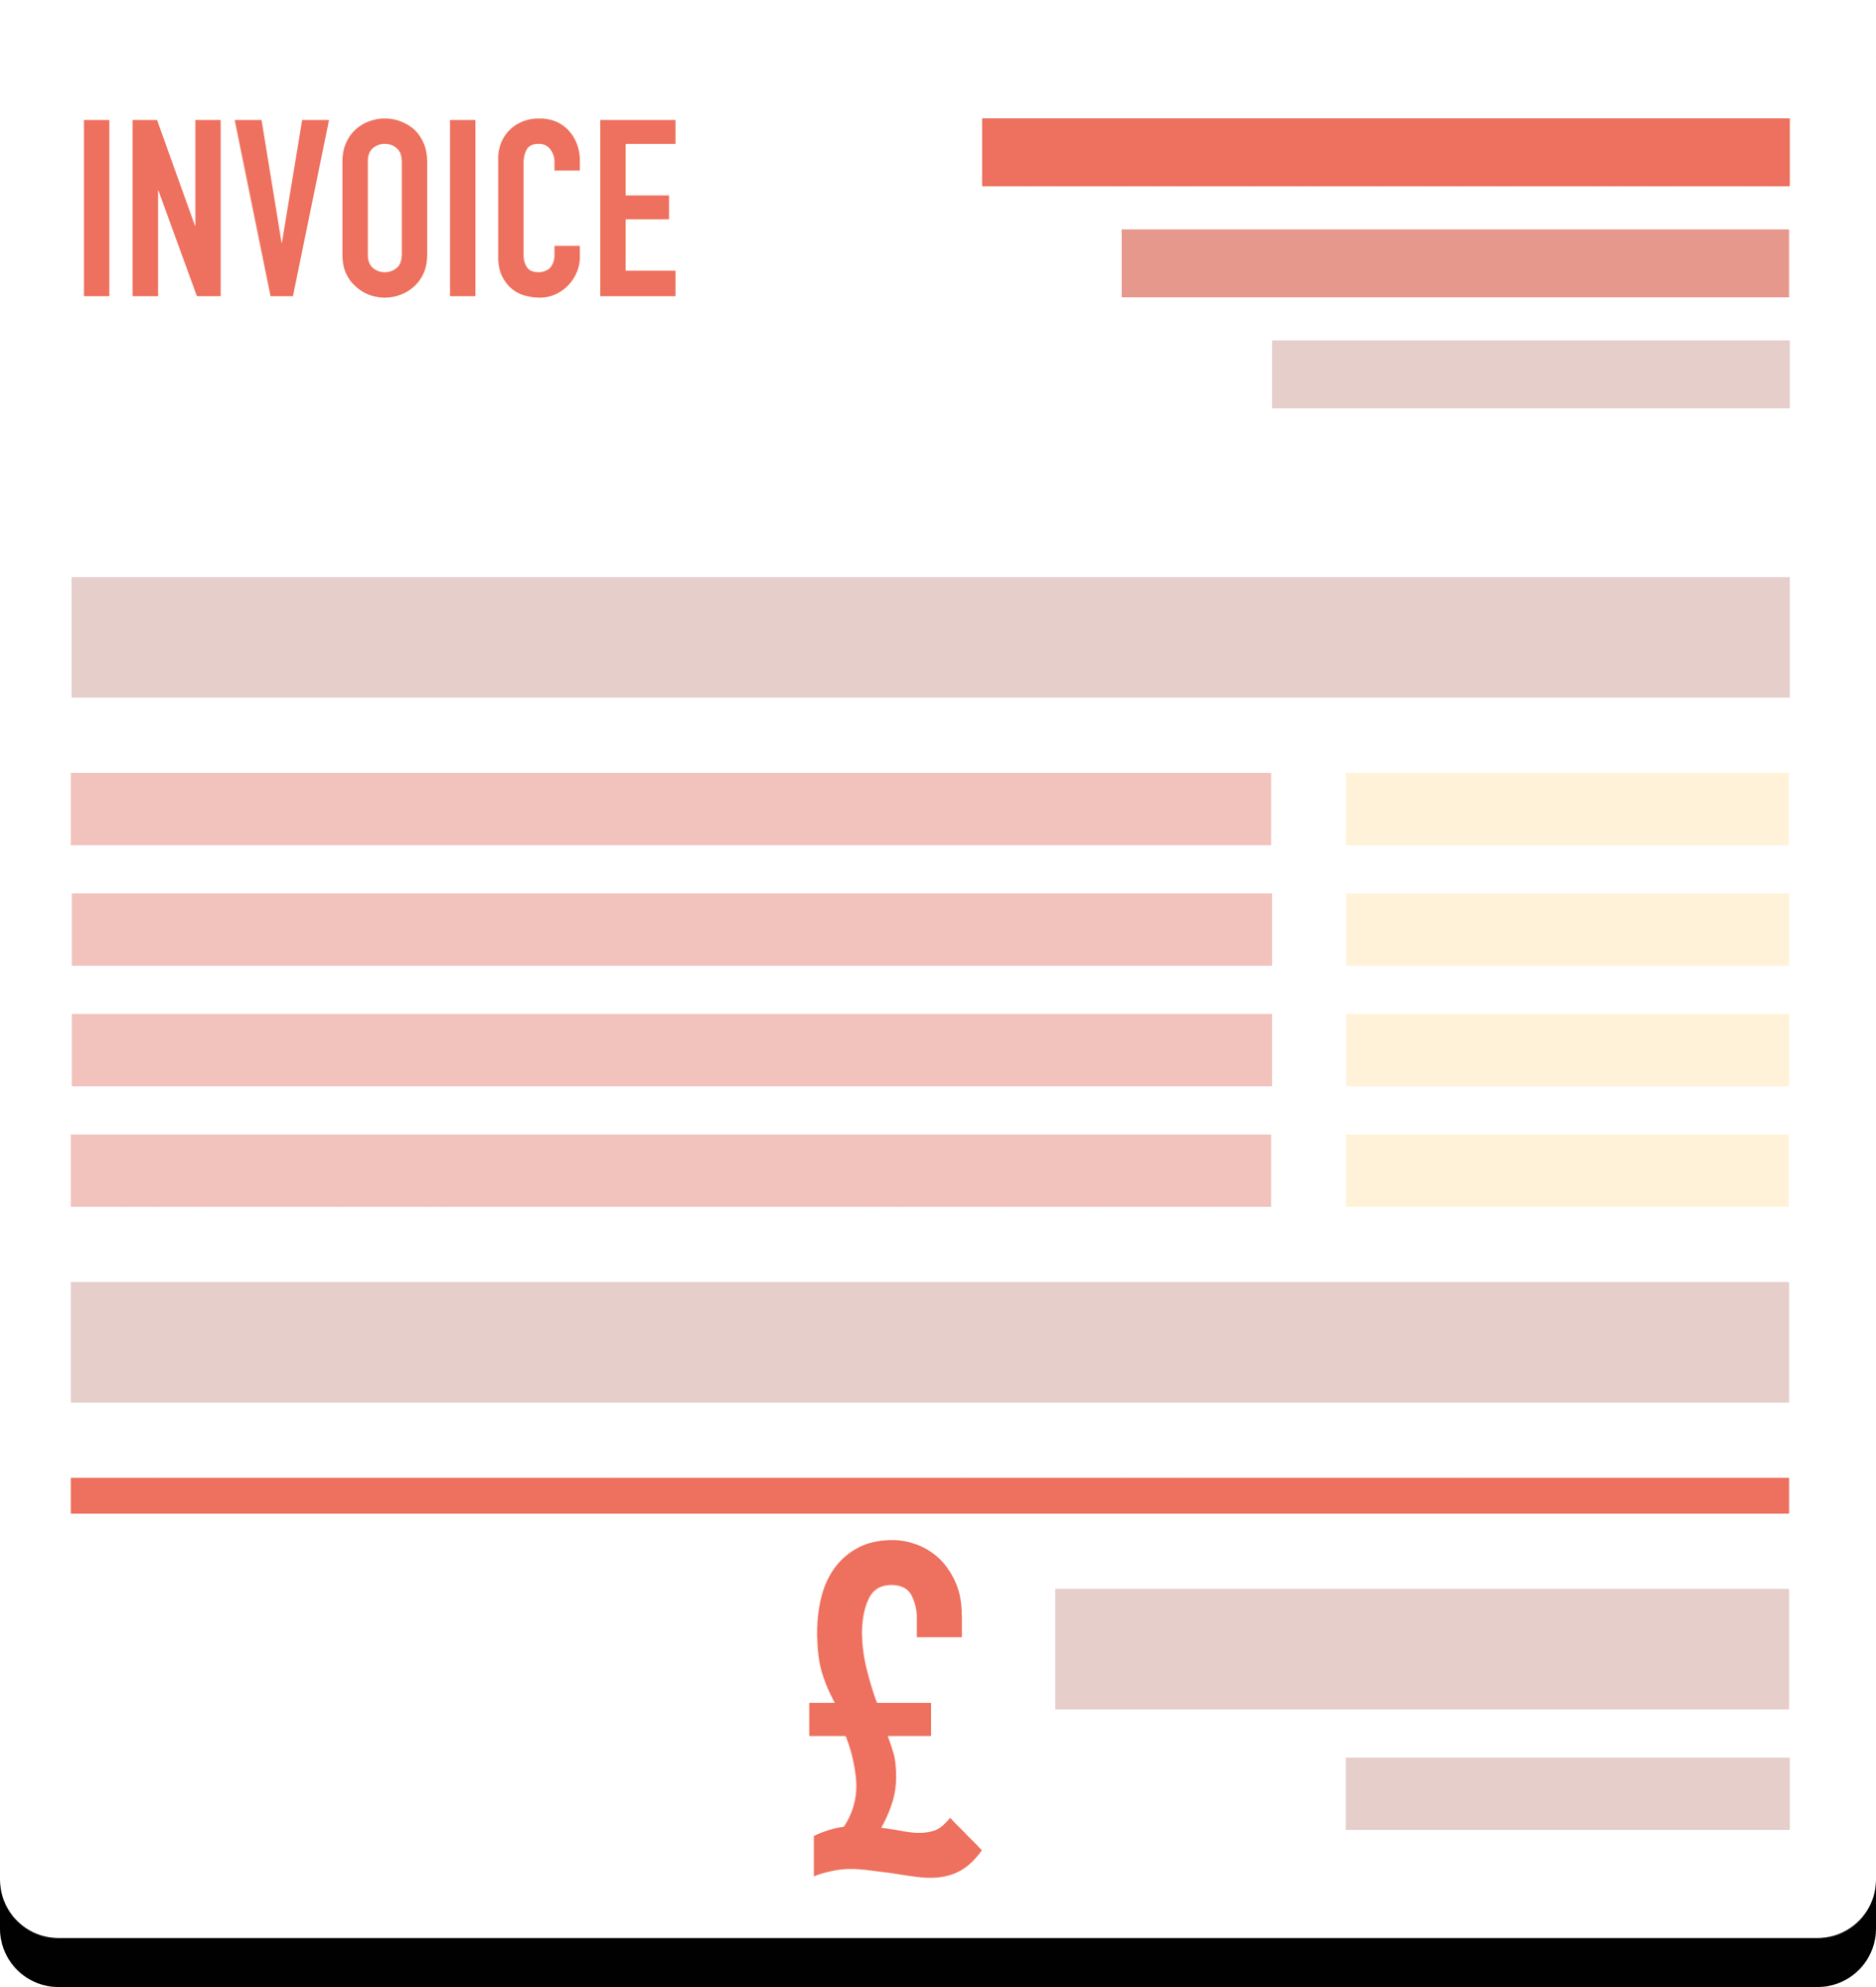 Invoice template for flooring company